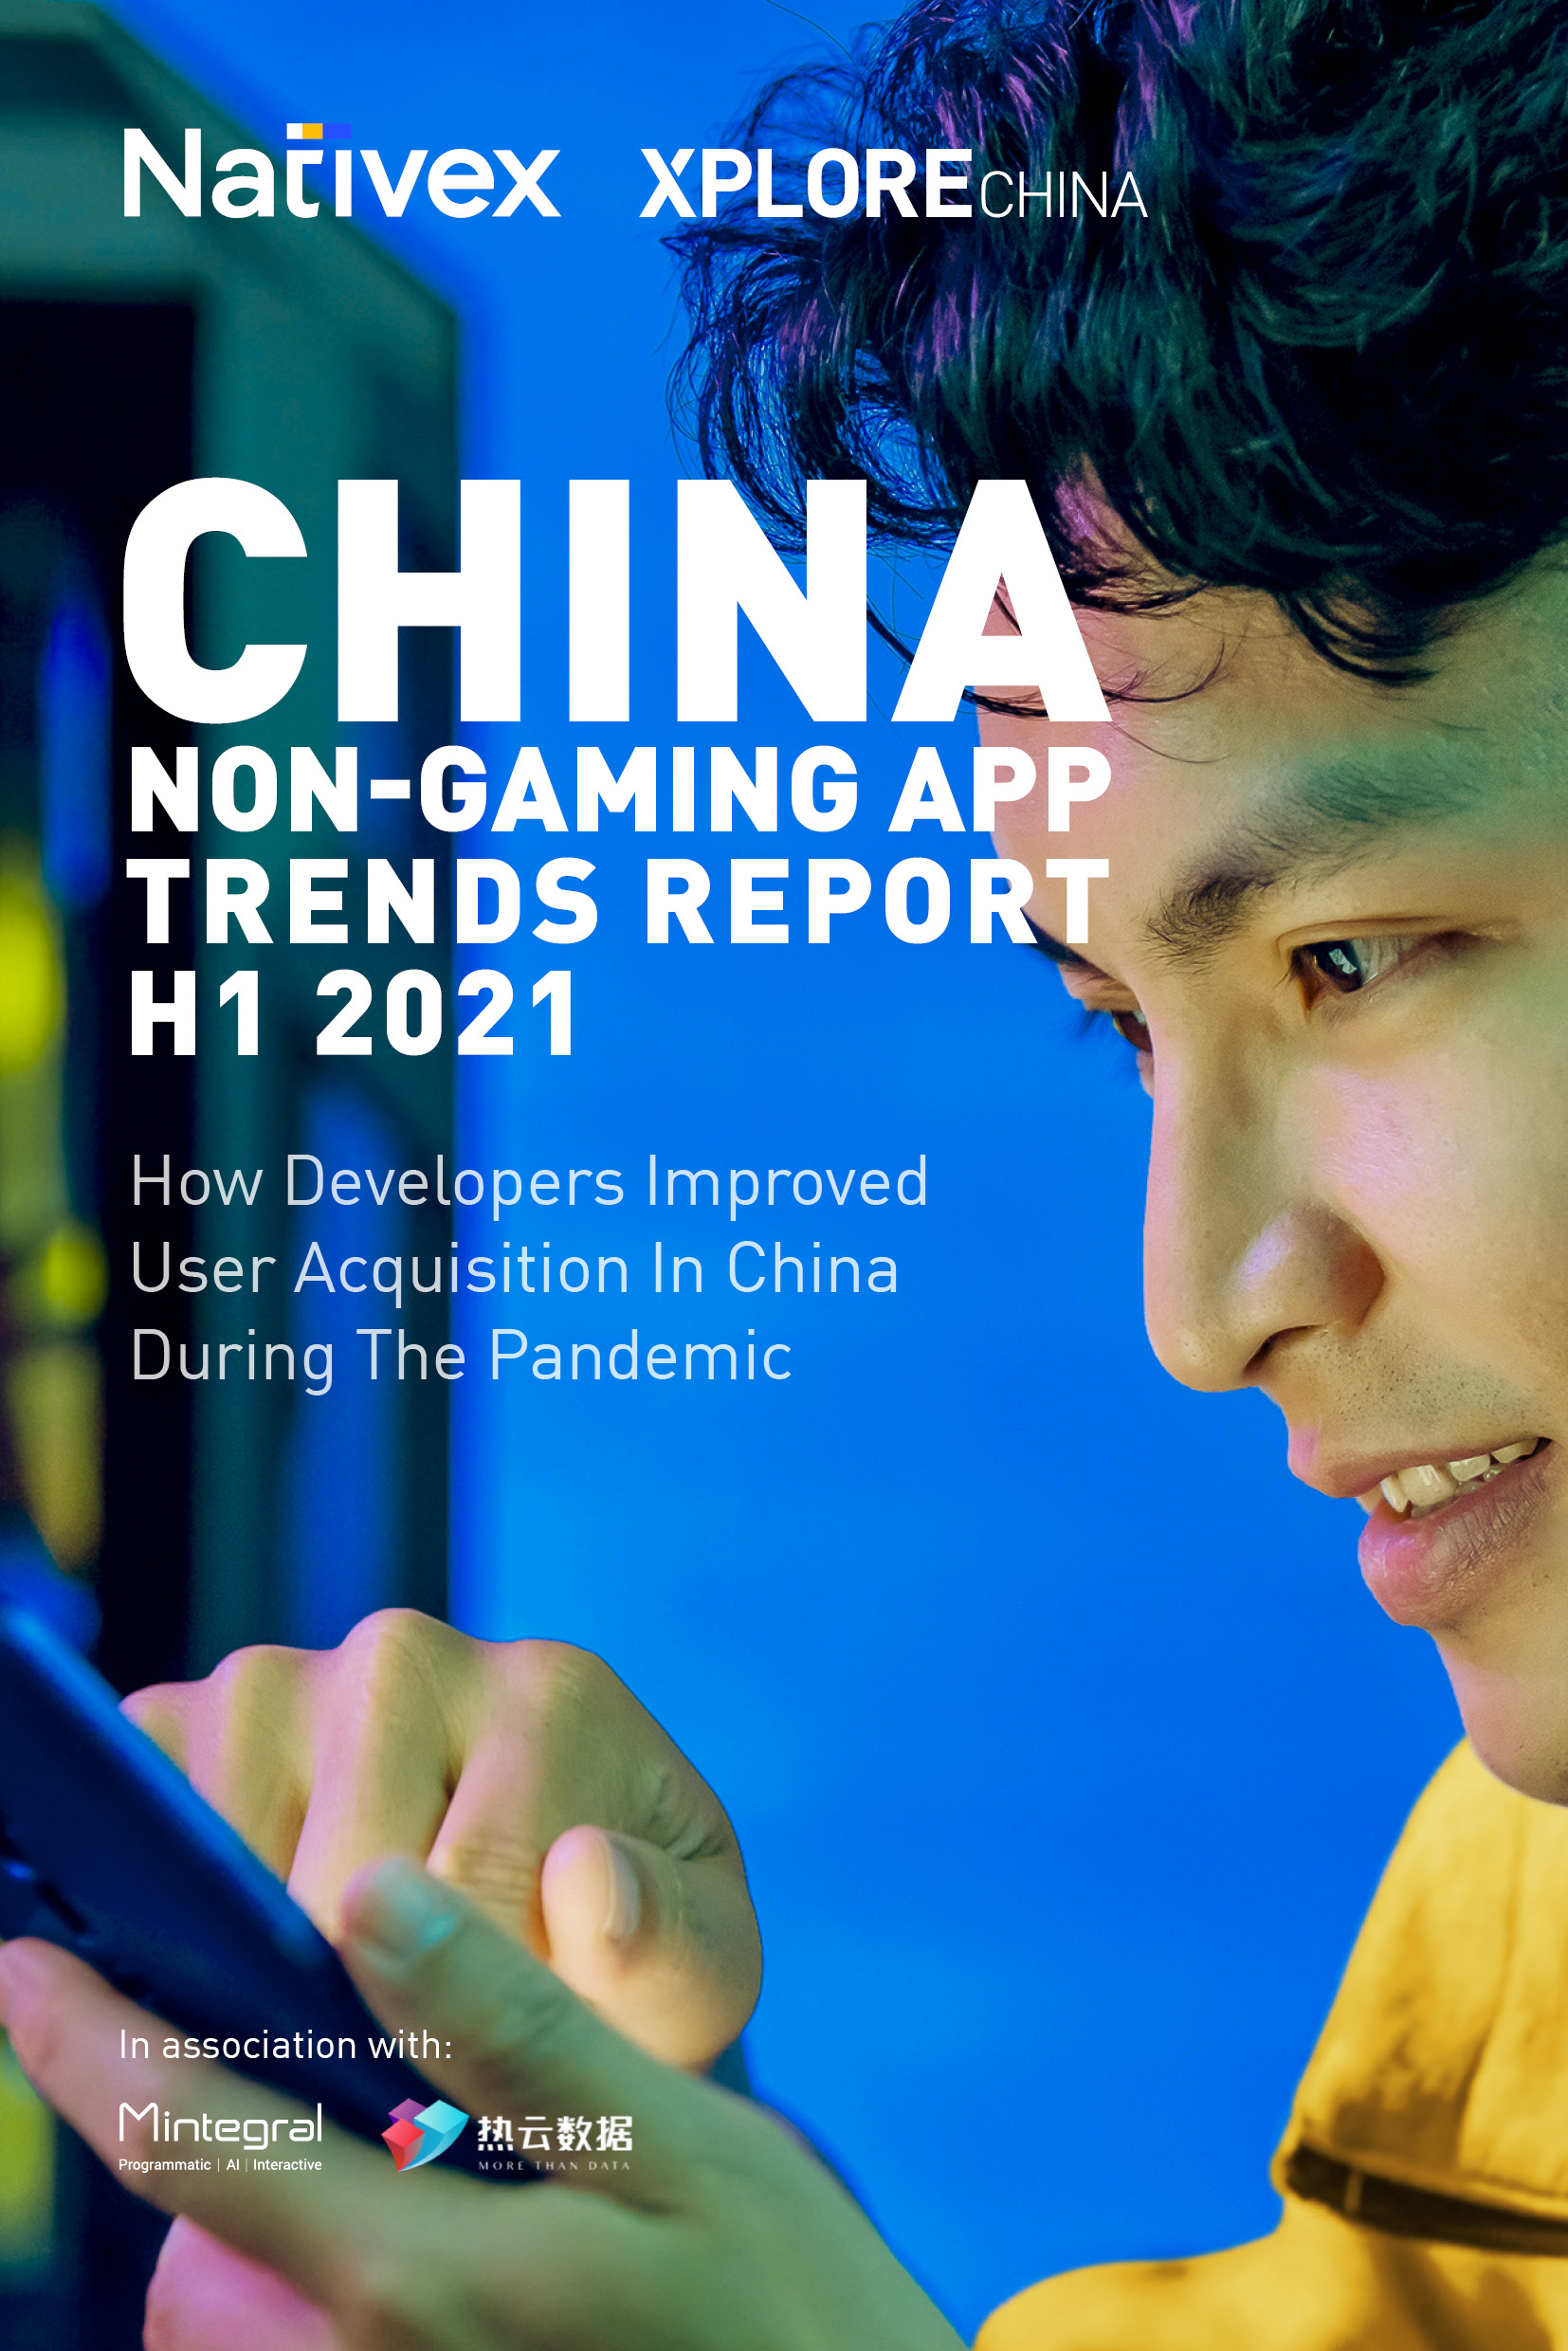 China Non-gaming App Trends Report H1 2021: How Developers Improved User Acquisition During The Pandemic